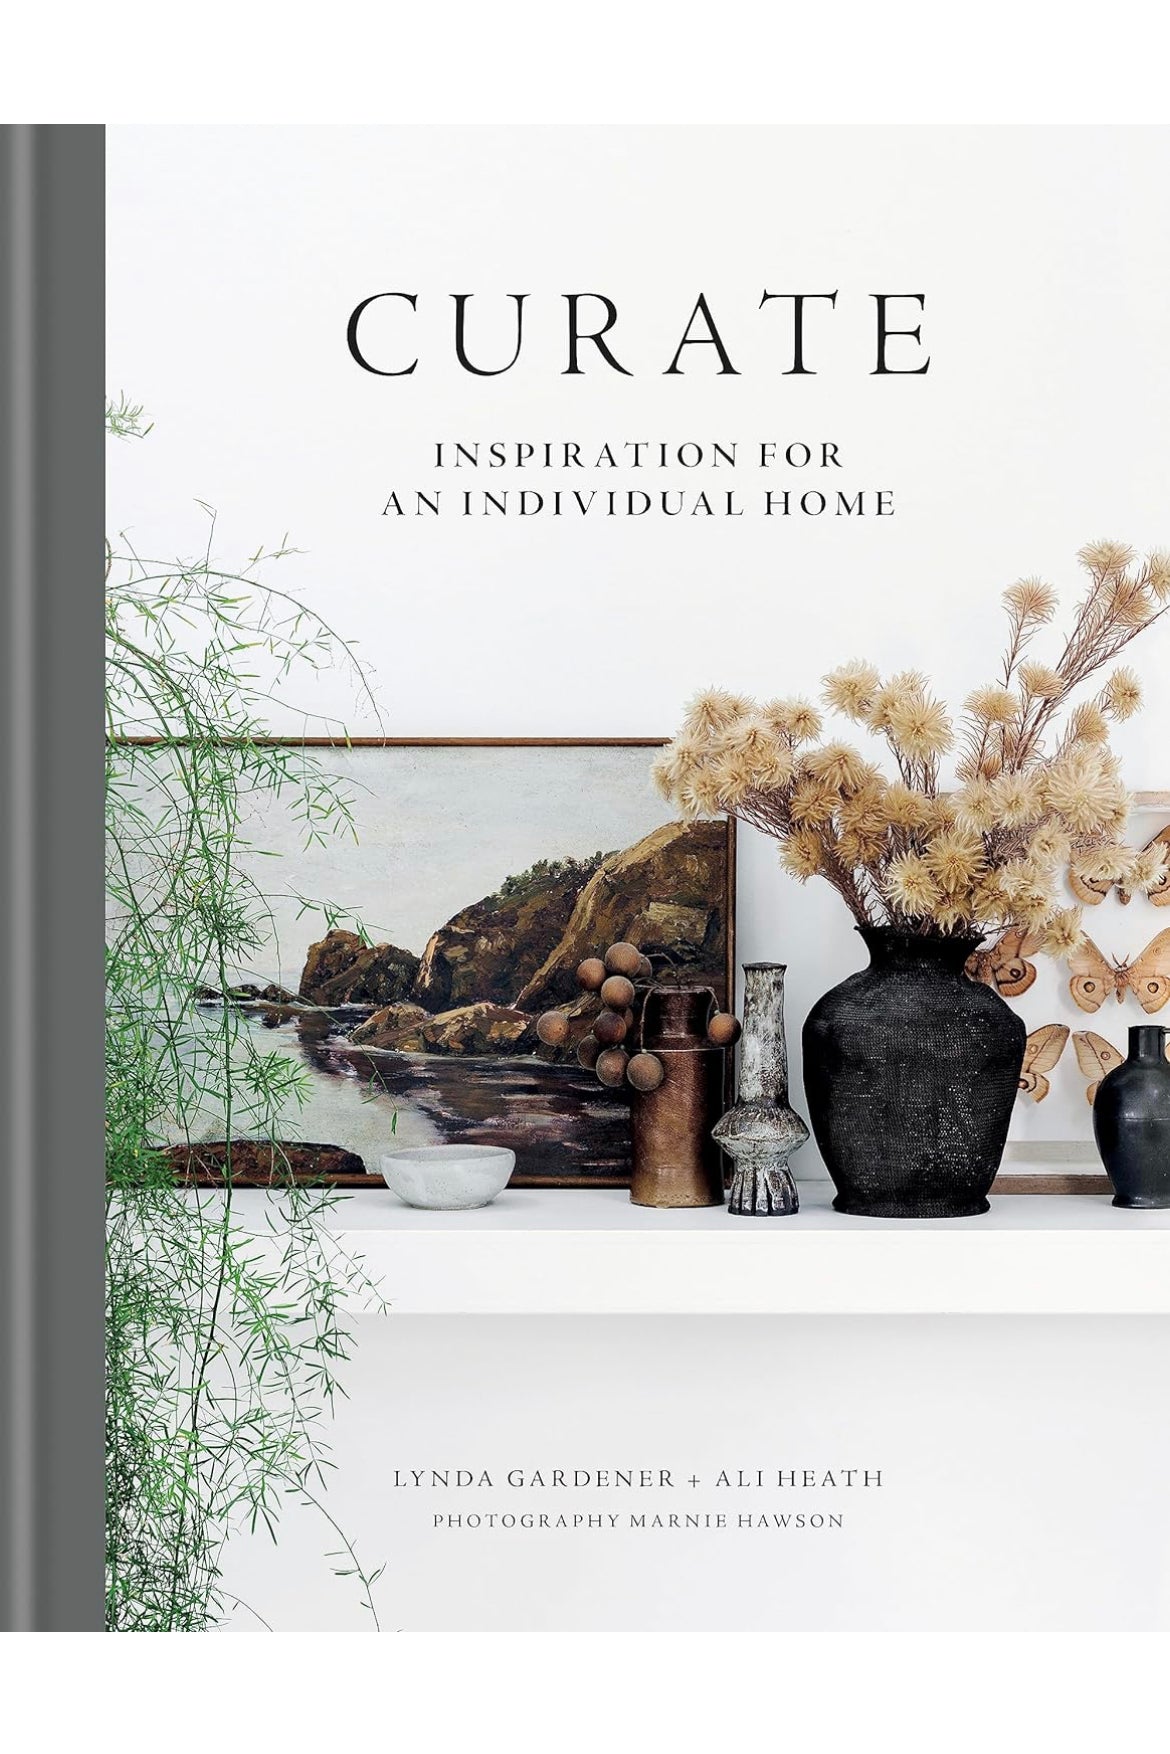 Curate -Inspiration for an individual home